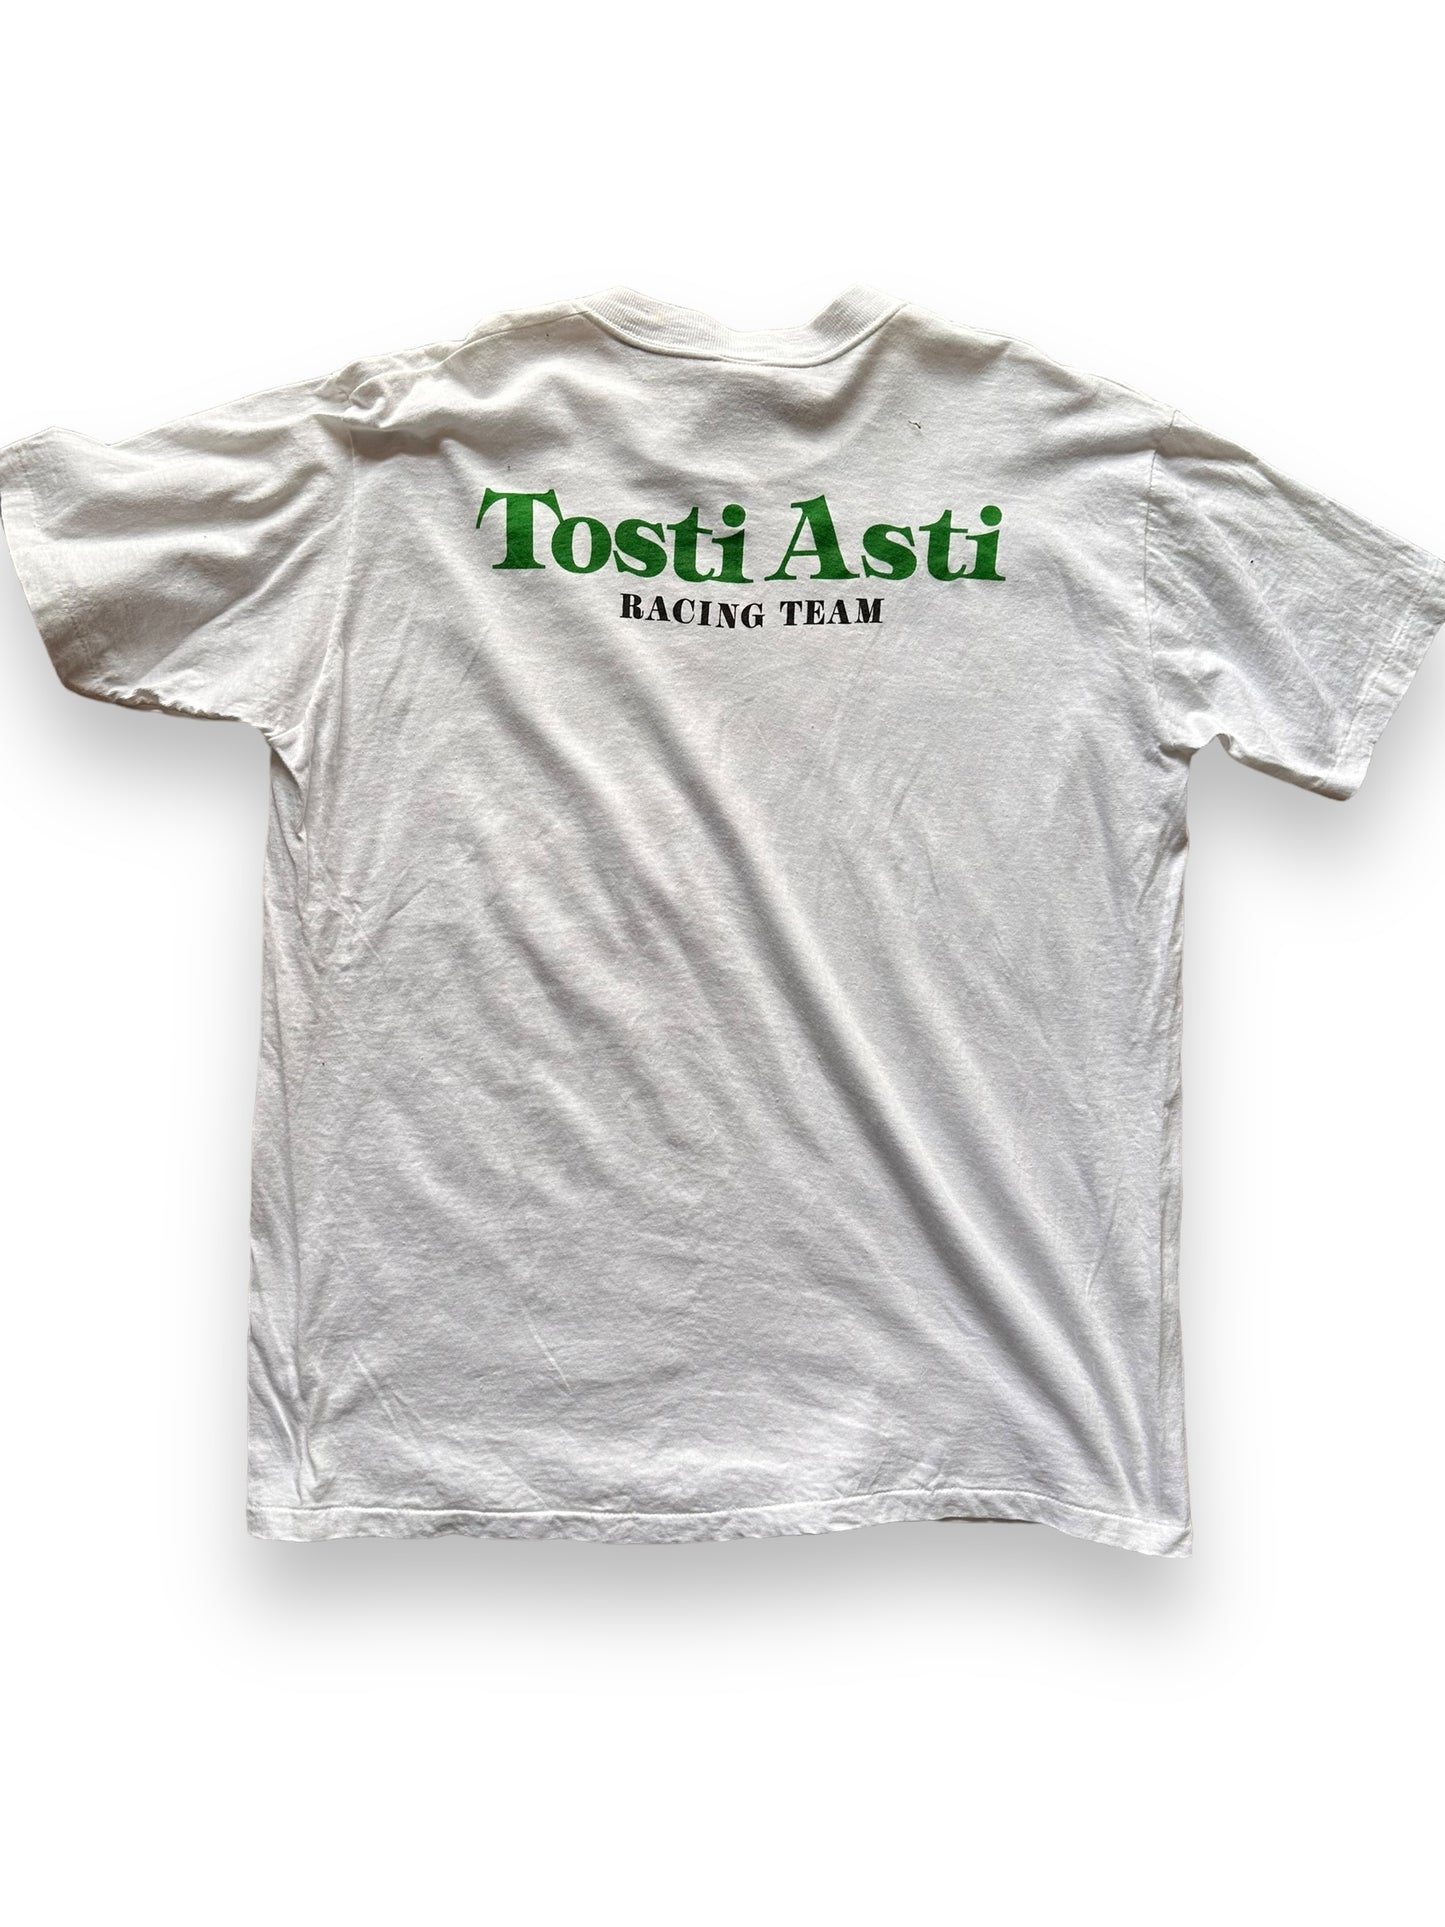 Rear View of Vintage Miss Tosti Asti Hydroplane Racing Tee SZ XL | Vintage Hydroplane T-Shirts Seattle | Barn Owl Vintage Clothing Seattle